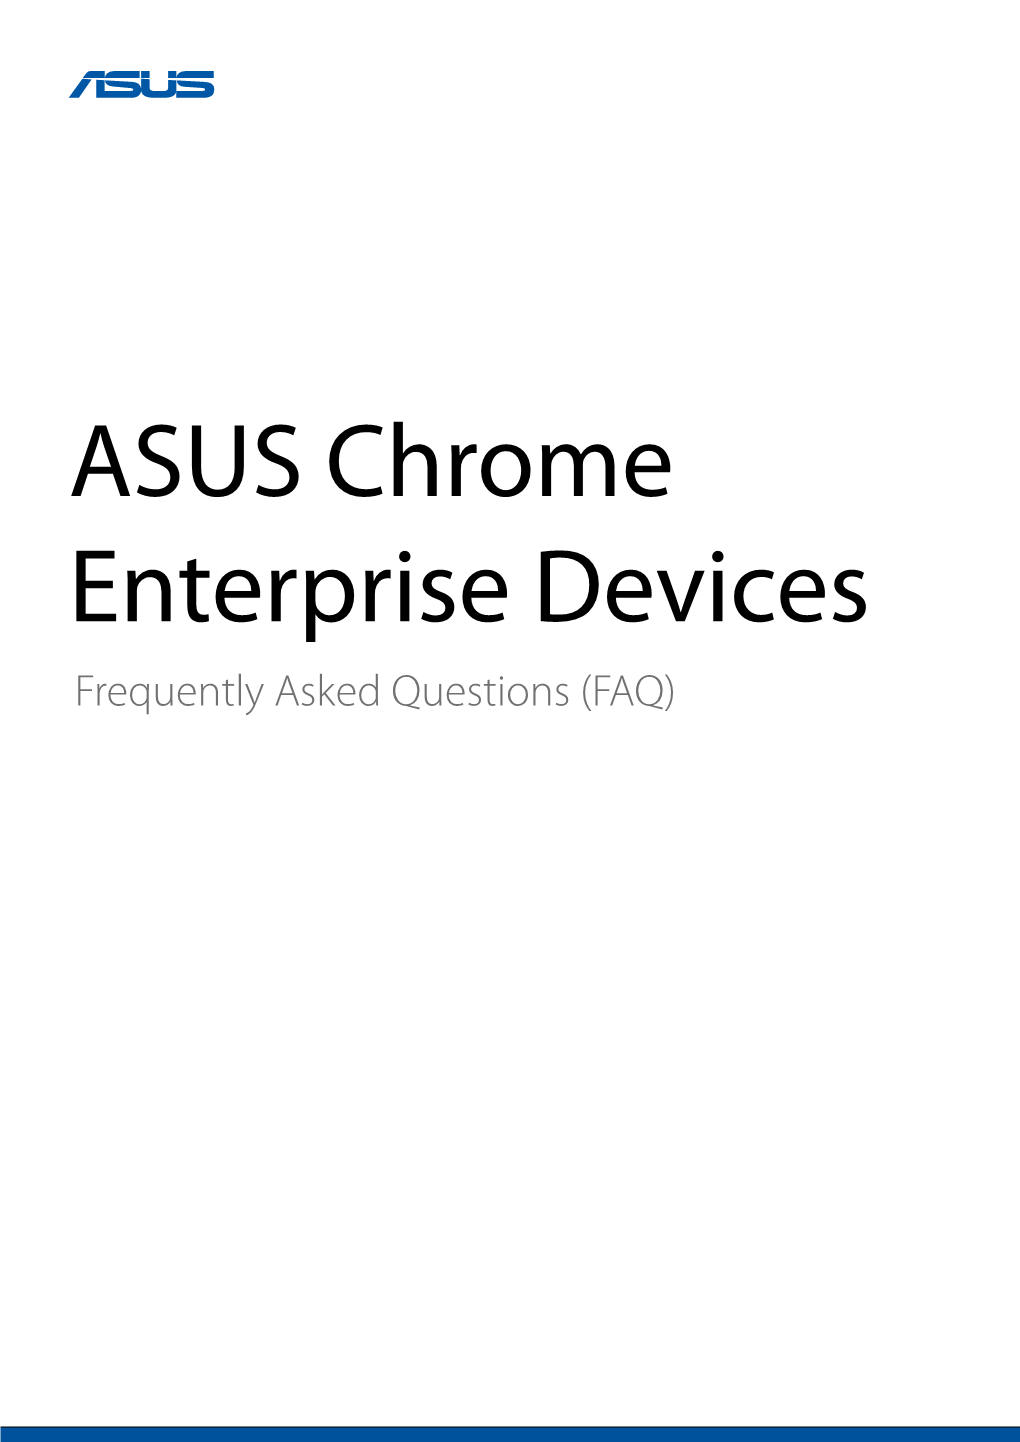 ASUS Chrome Enterprise Devices Frequently Asked Questions (FAQ) 1